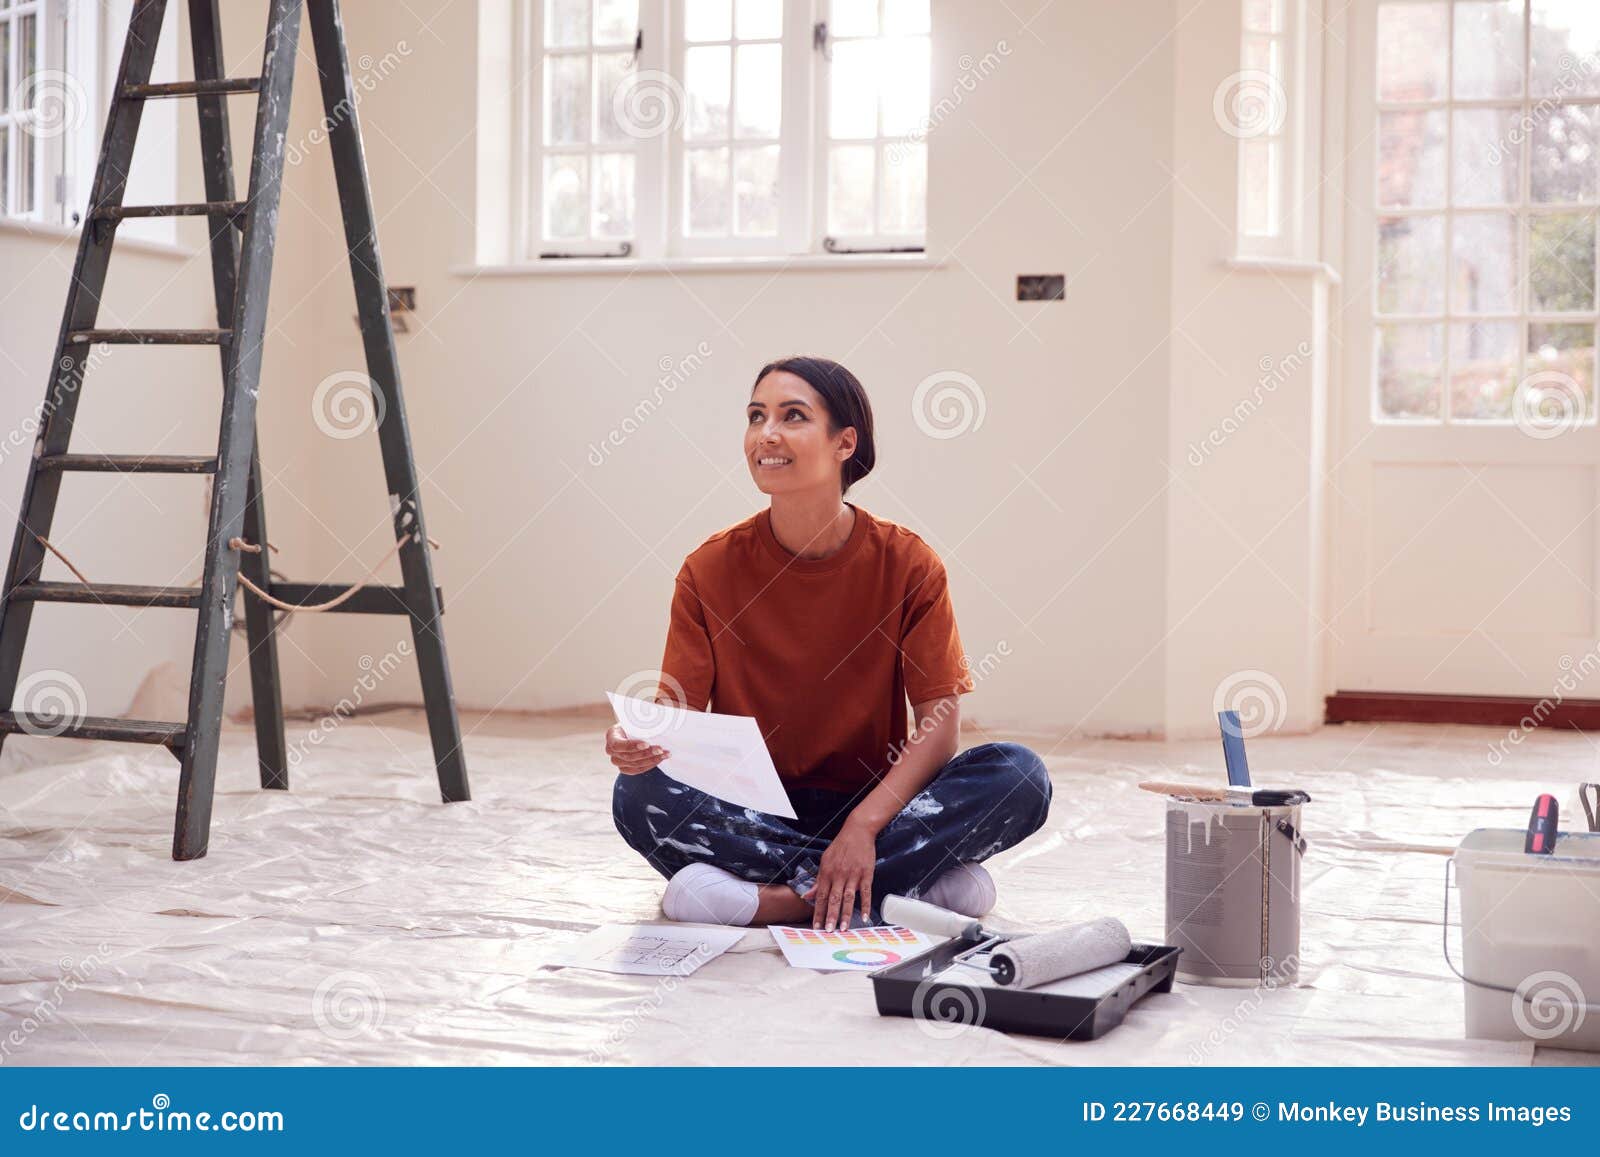 Woman Sitting on Floor with Paint Chart Ready To Decorate New Home ...